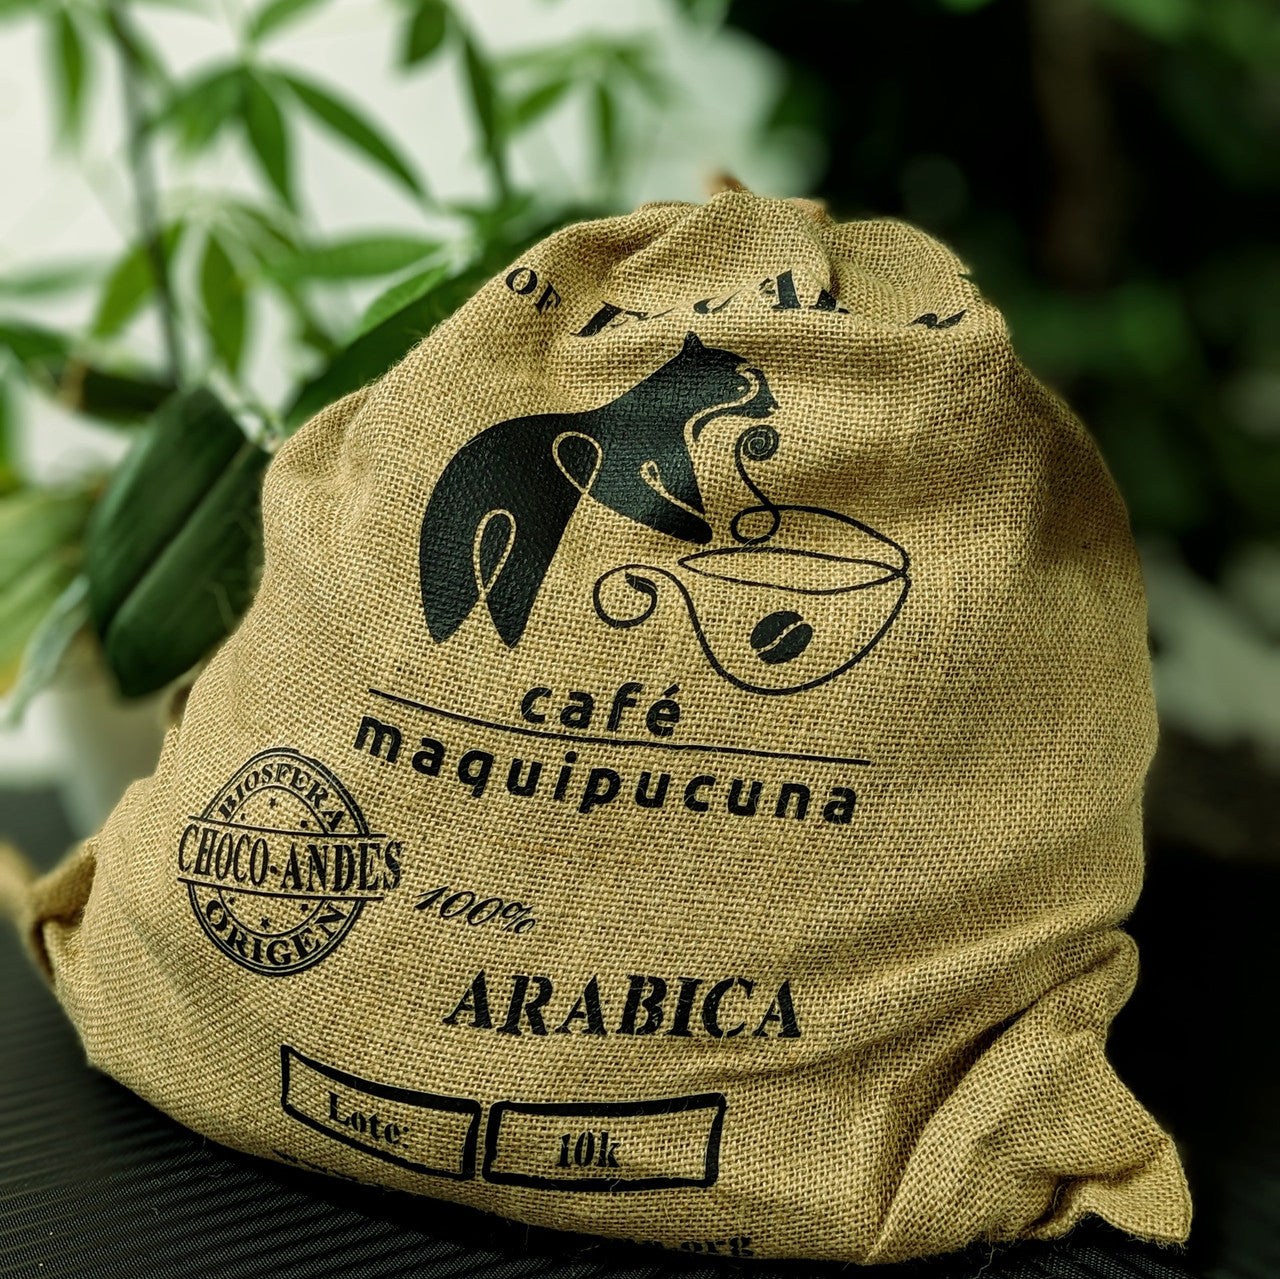 Maquipucuna - Specialty Green Coffee Beans 10kg